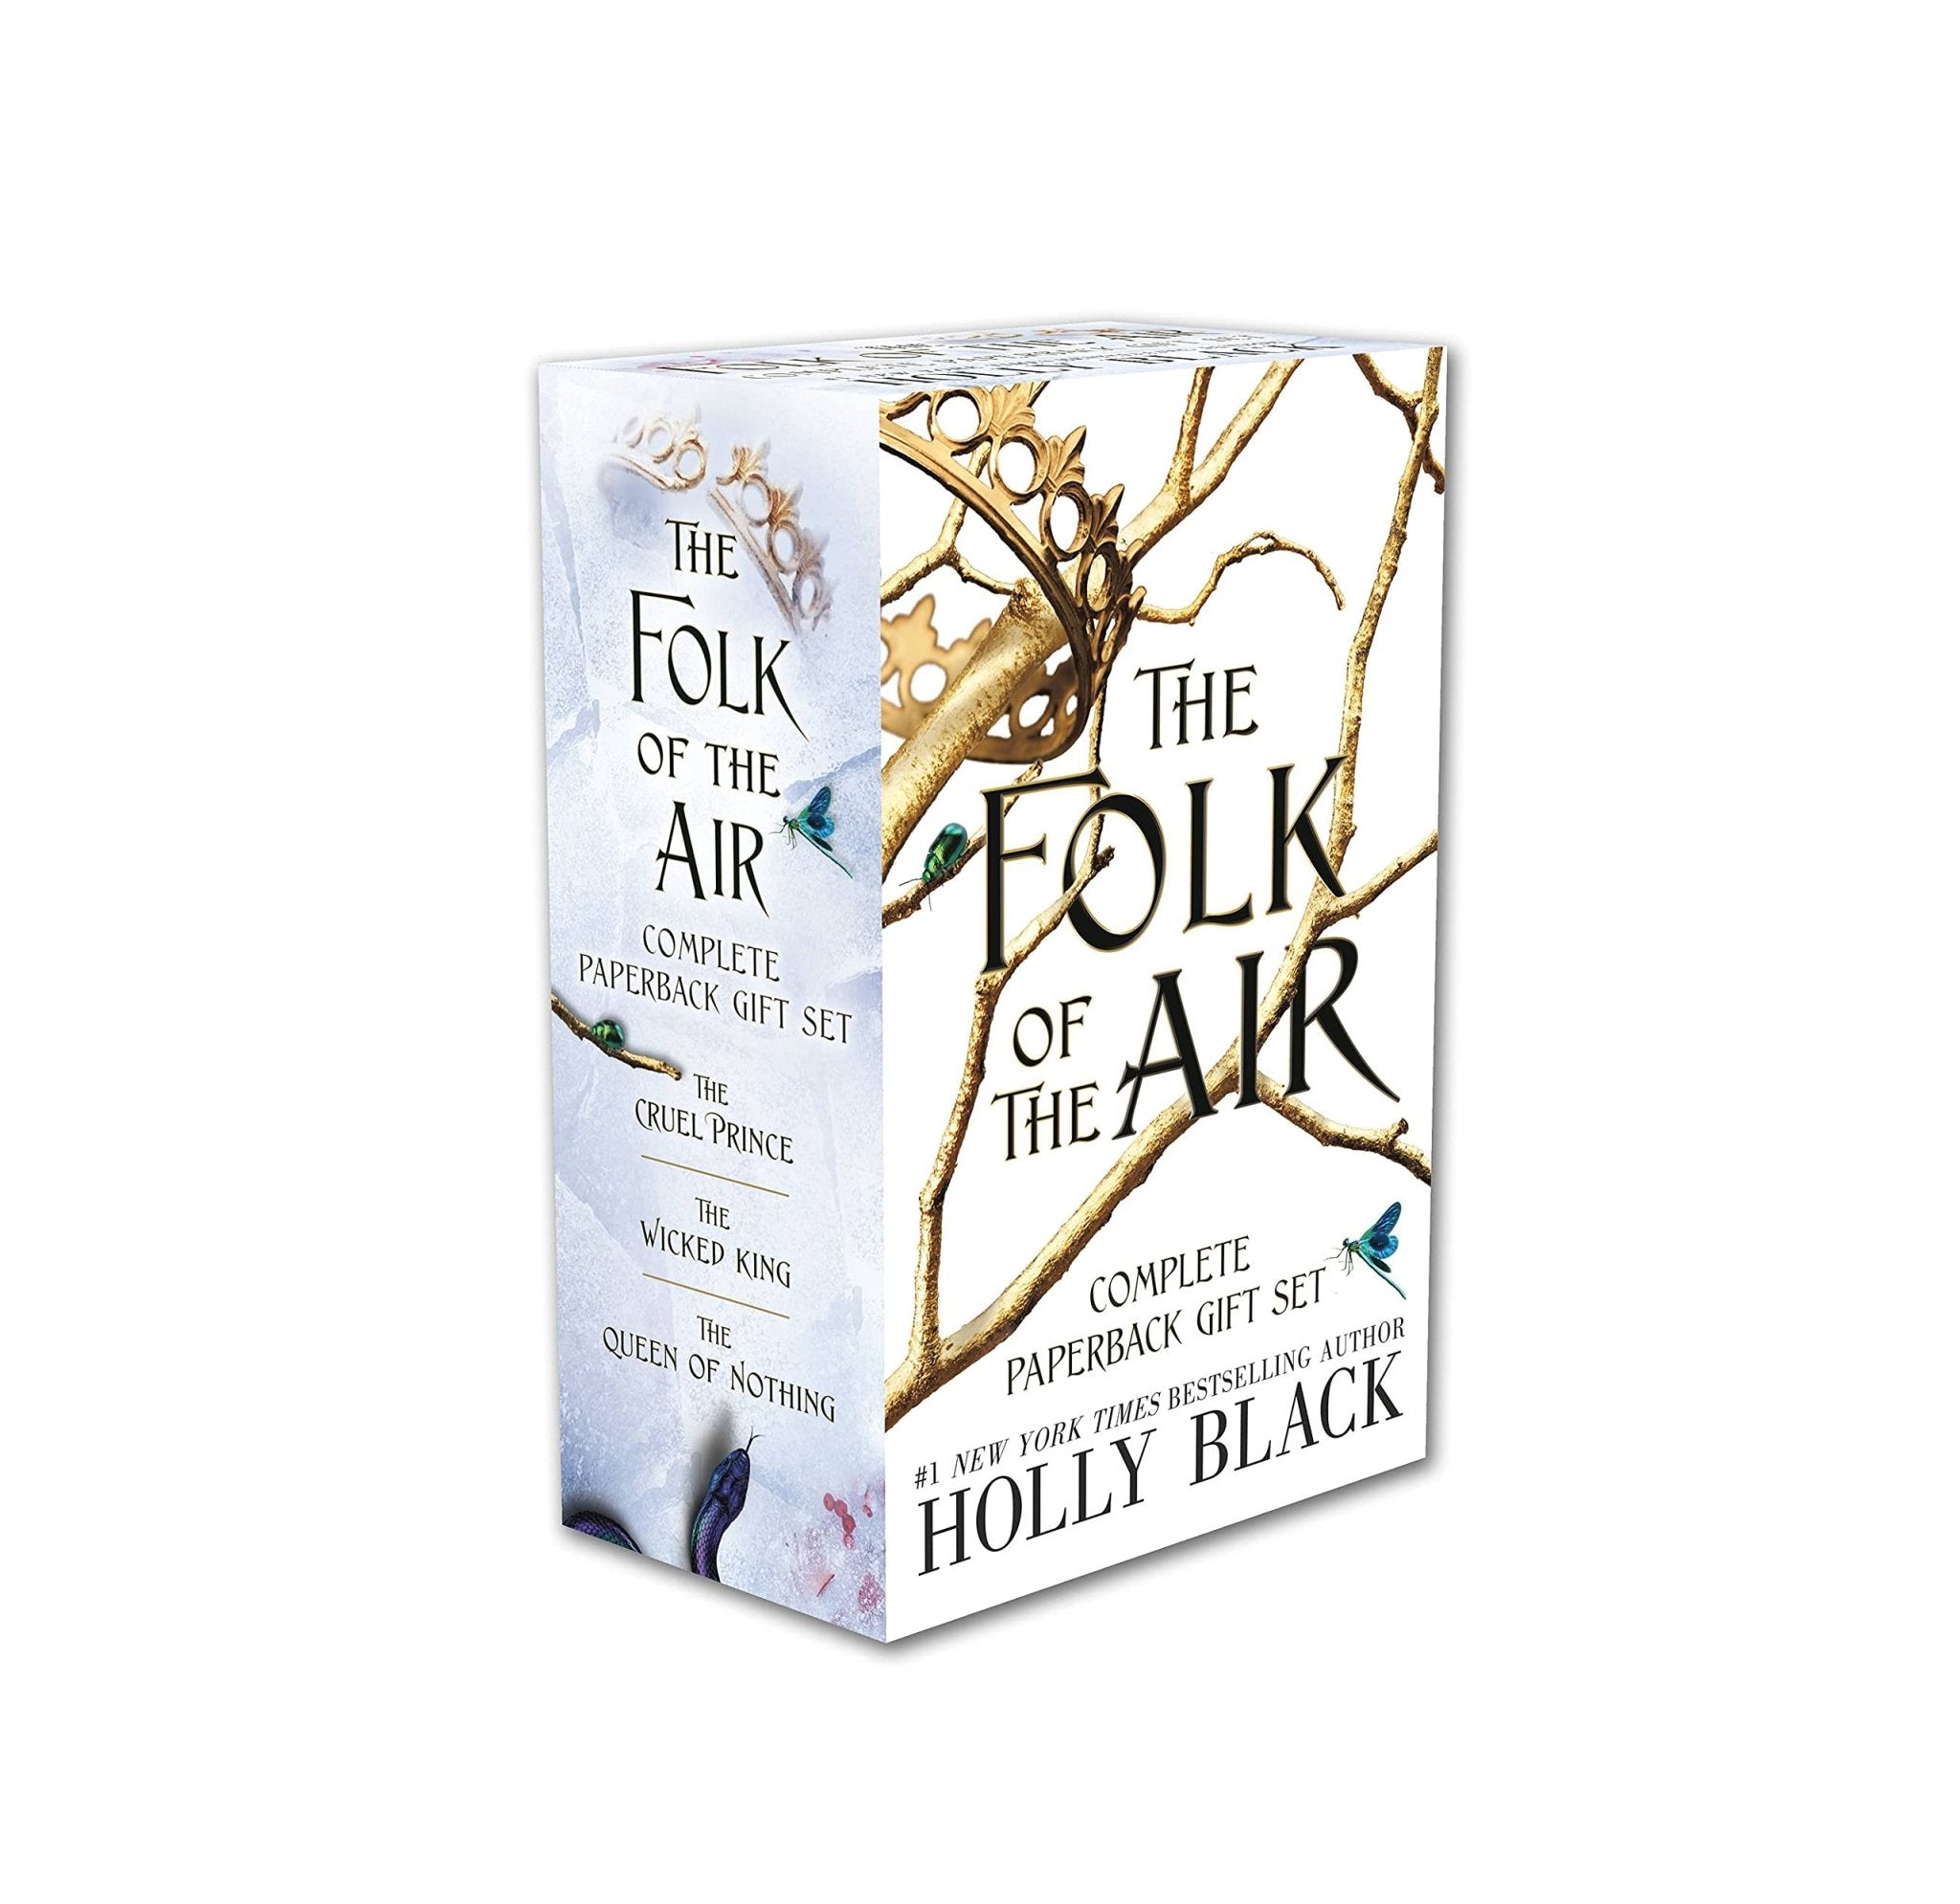 The Folk of the Air Complete Paperback Gift Set by Holly Black [Paperback] - LV'S Global Media